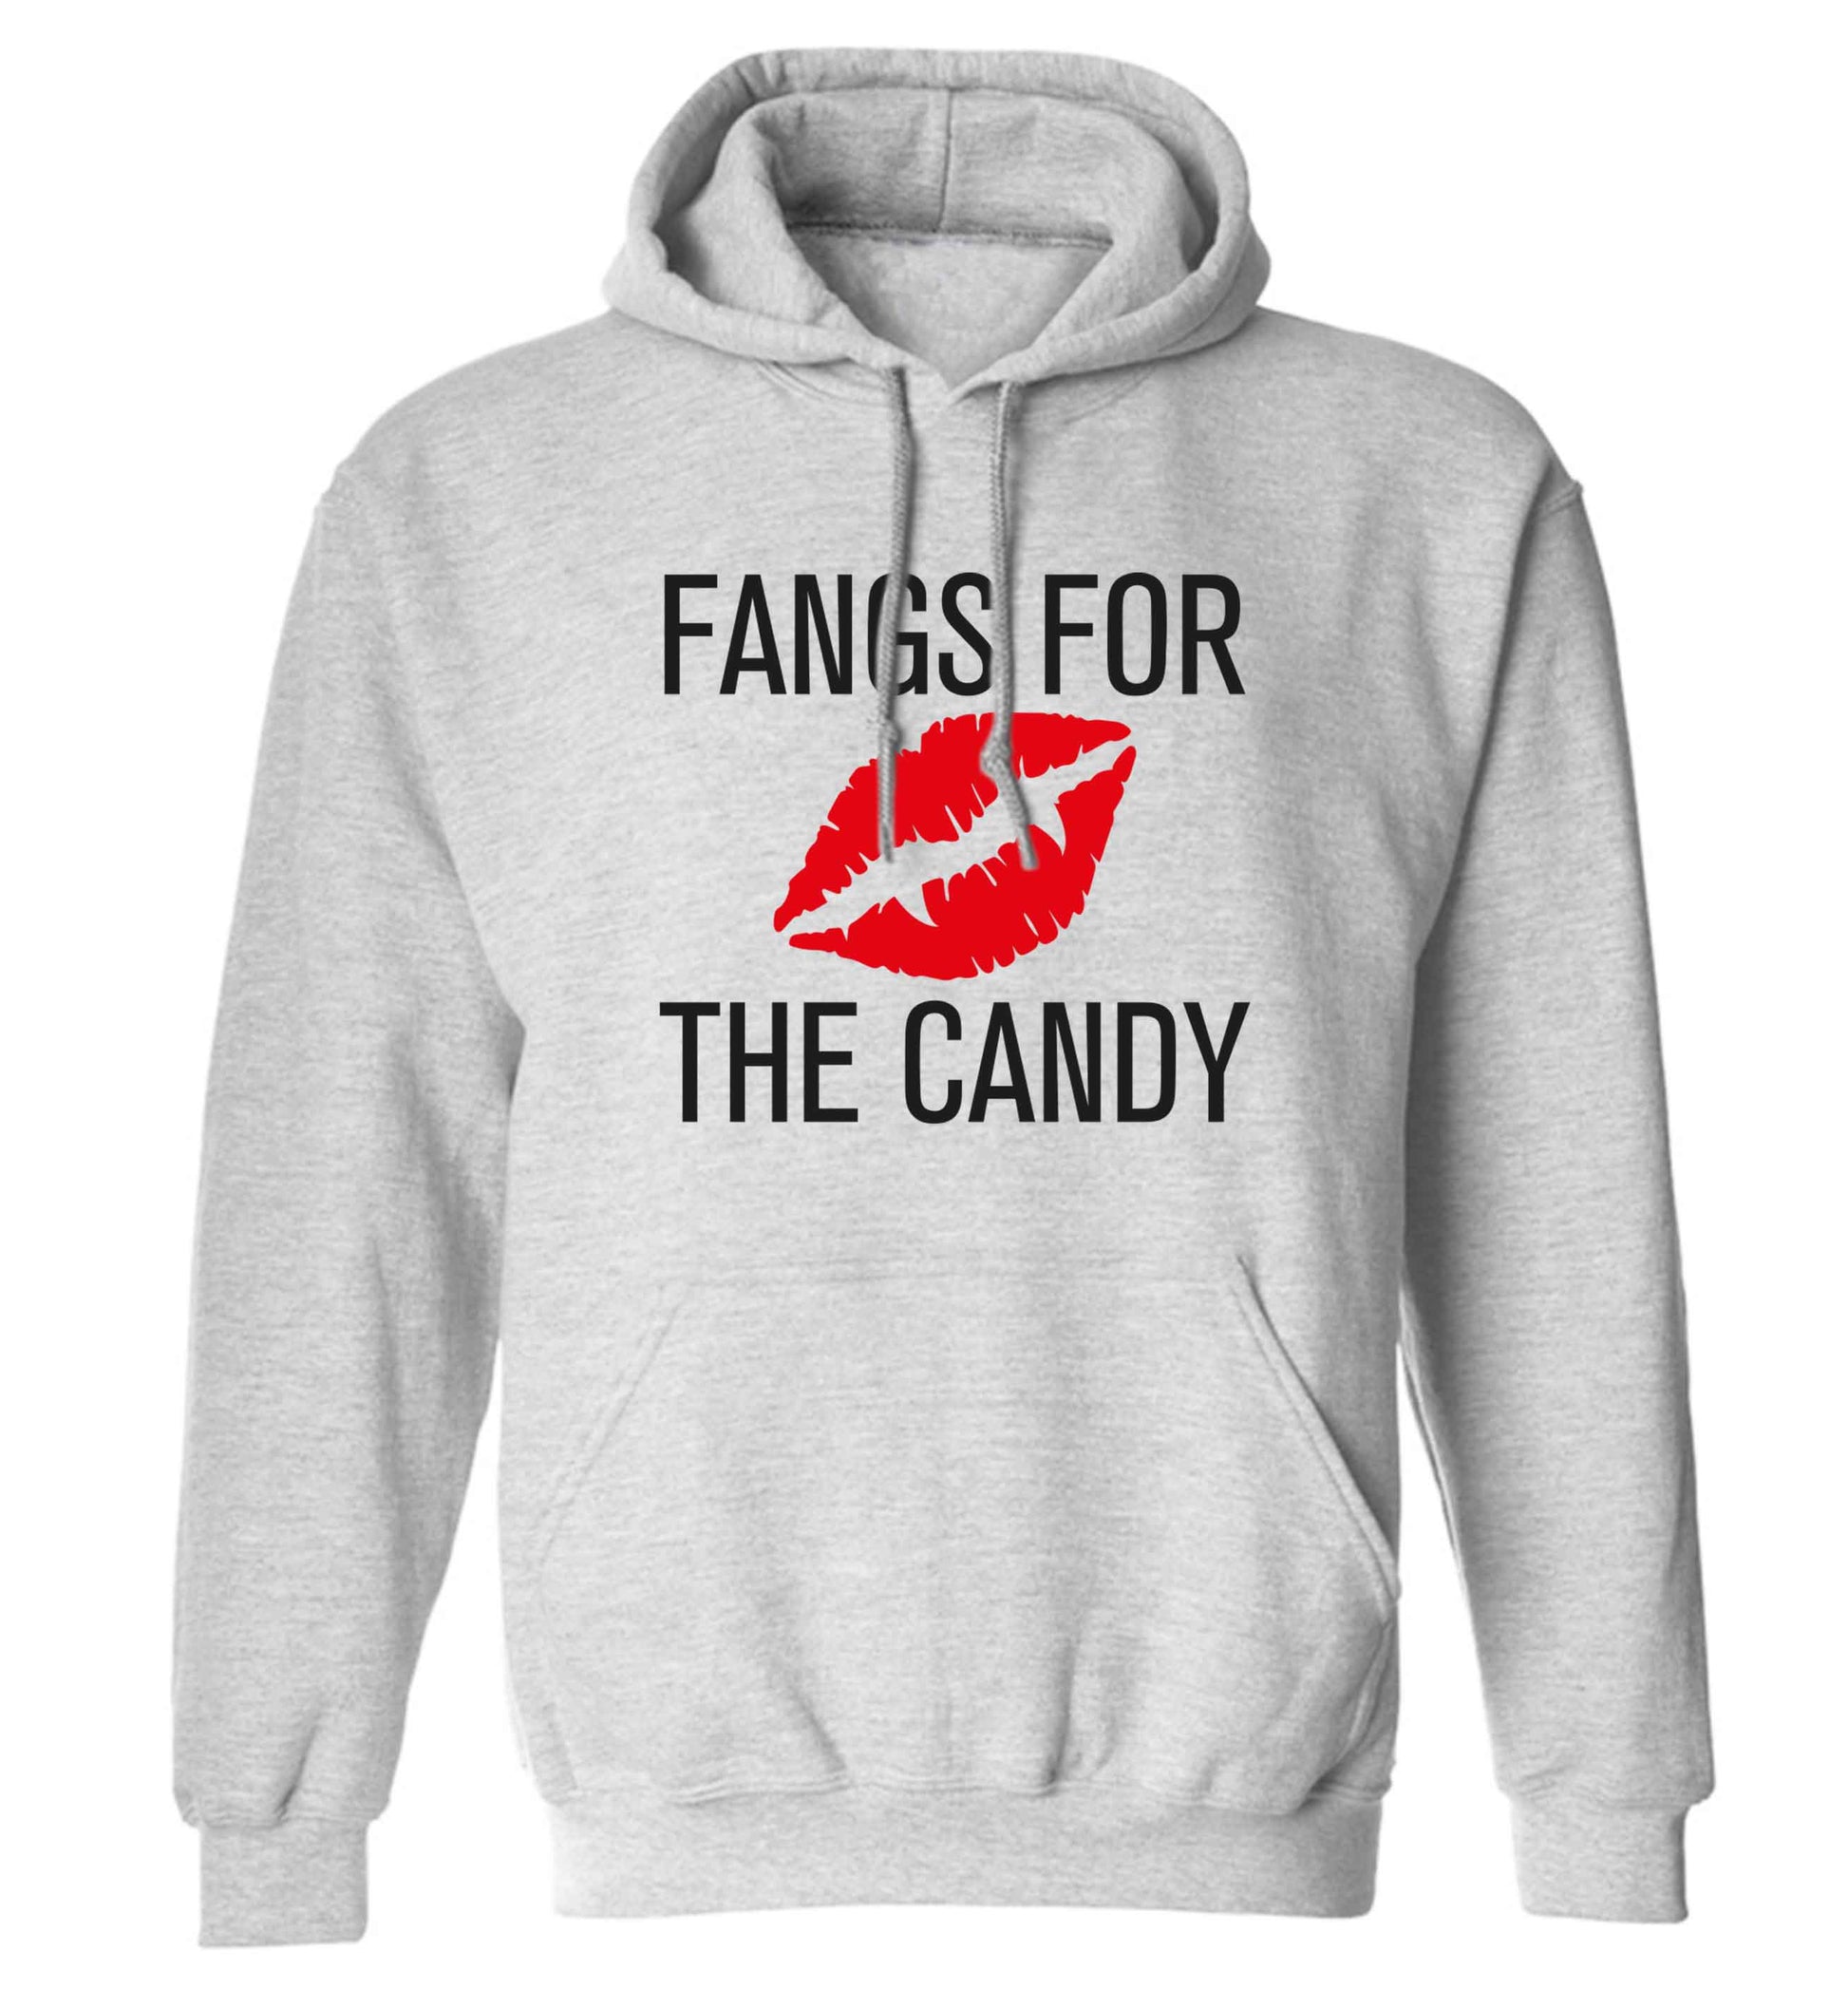 Fangs for the candy adults unisex grey hoodie 2XL